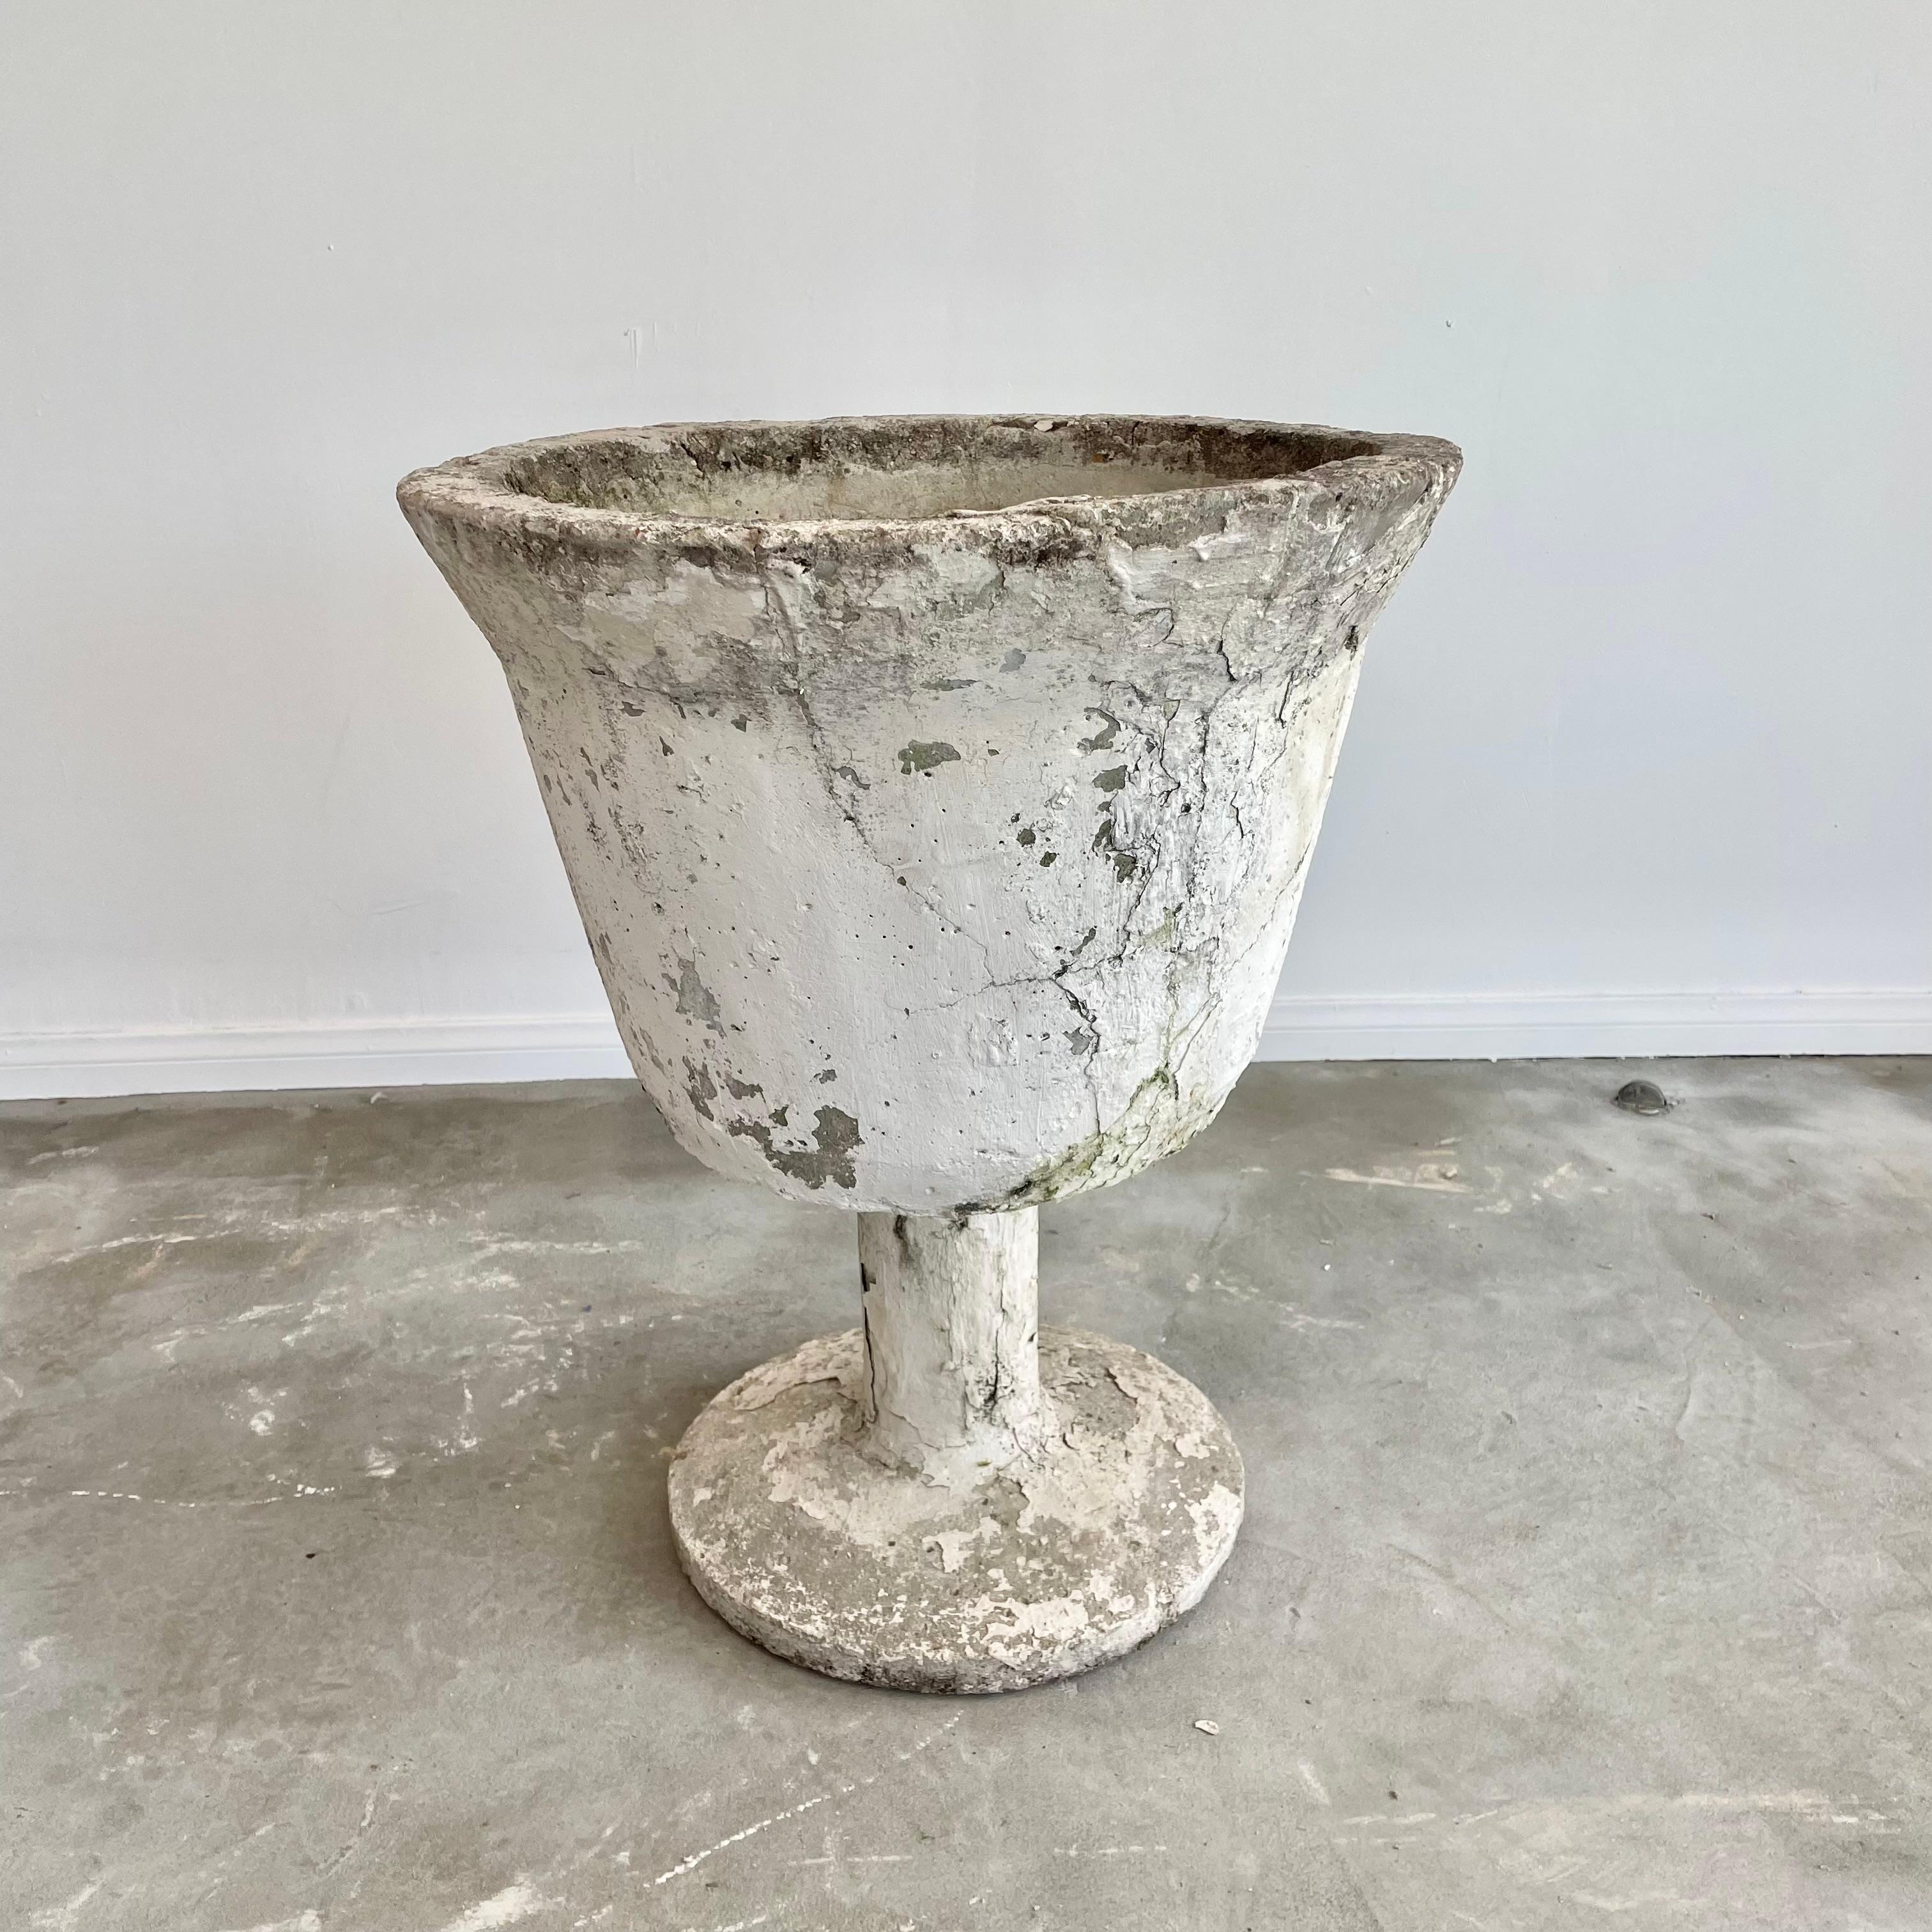 Monumental concrete goblet planter with an incredible patina. An unusual planter in a massive size. After spending decades in the elements, each goblet has great patina and weathering giving it an antique victorian feel while at the same time having